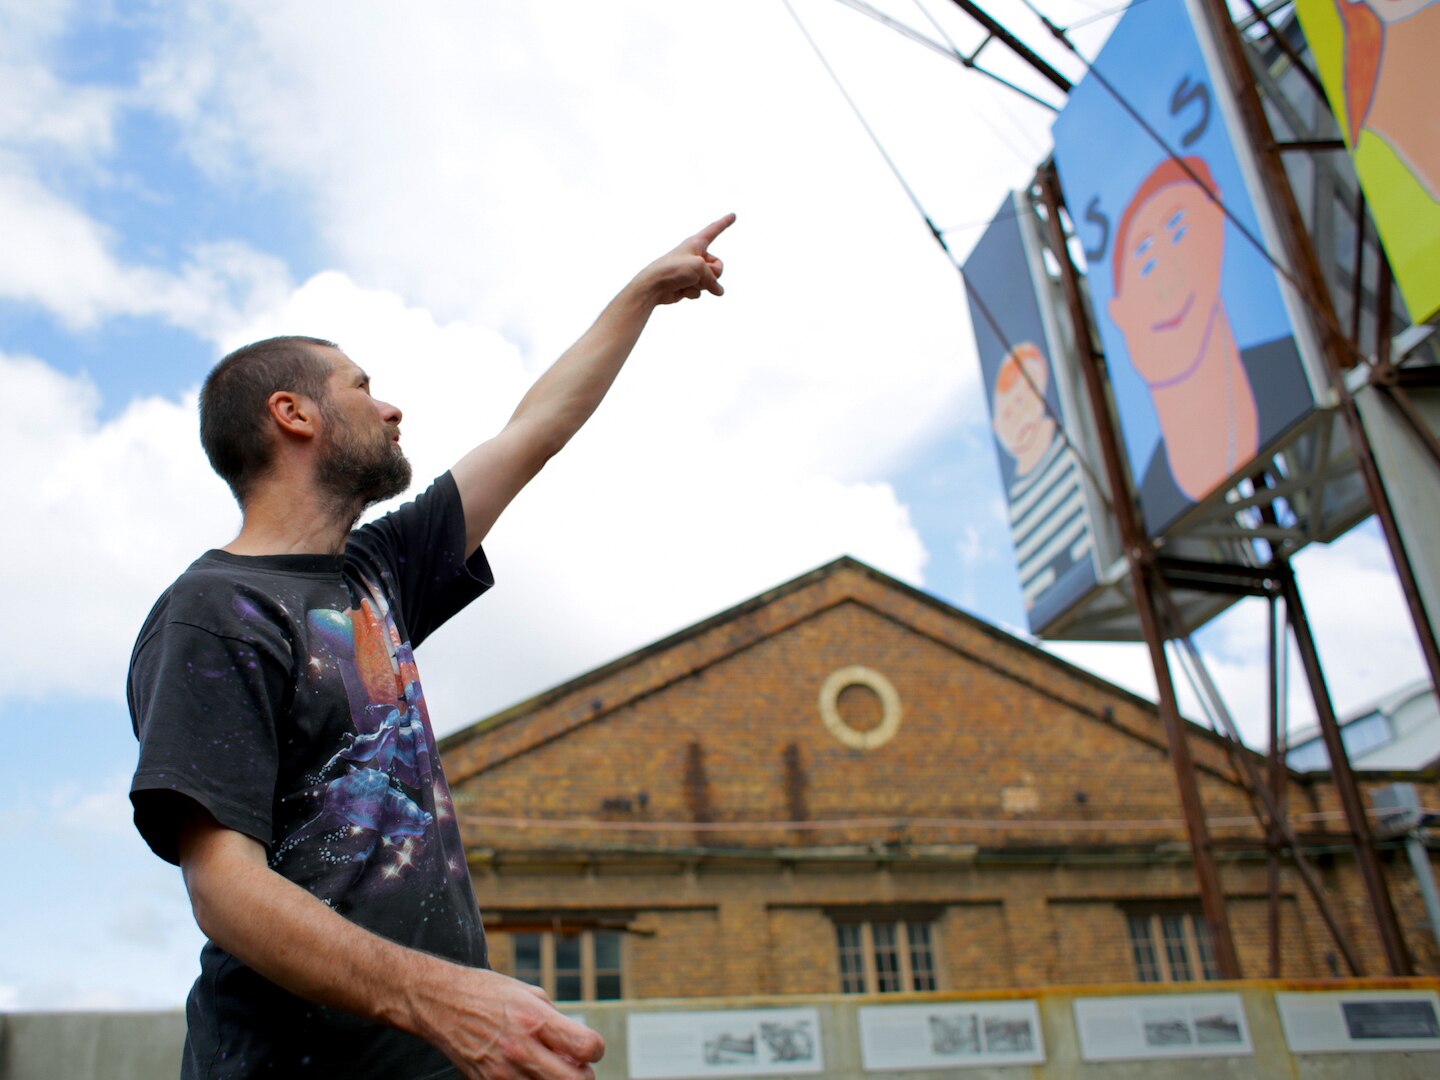 The artist, with short brown hair and a black t-shirt, stands outside pointing at a large billboards with his paintings on it